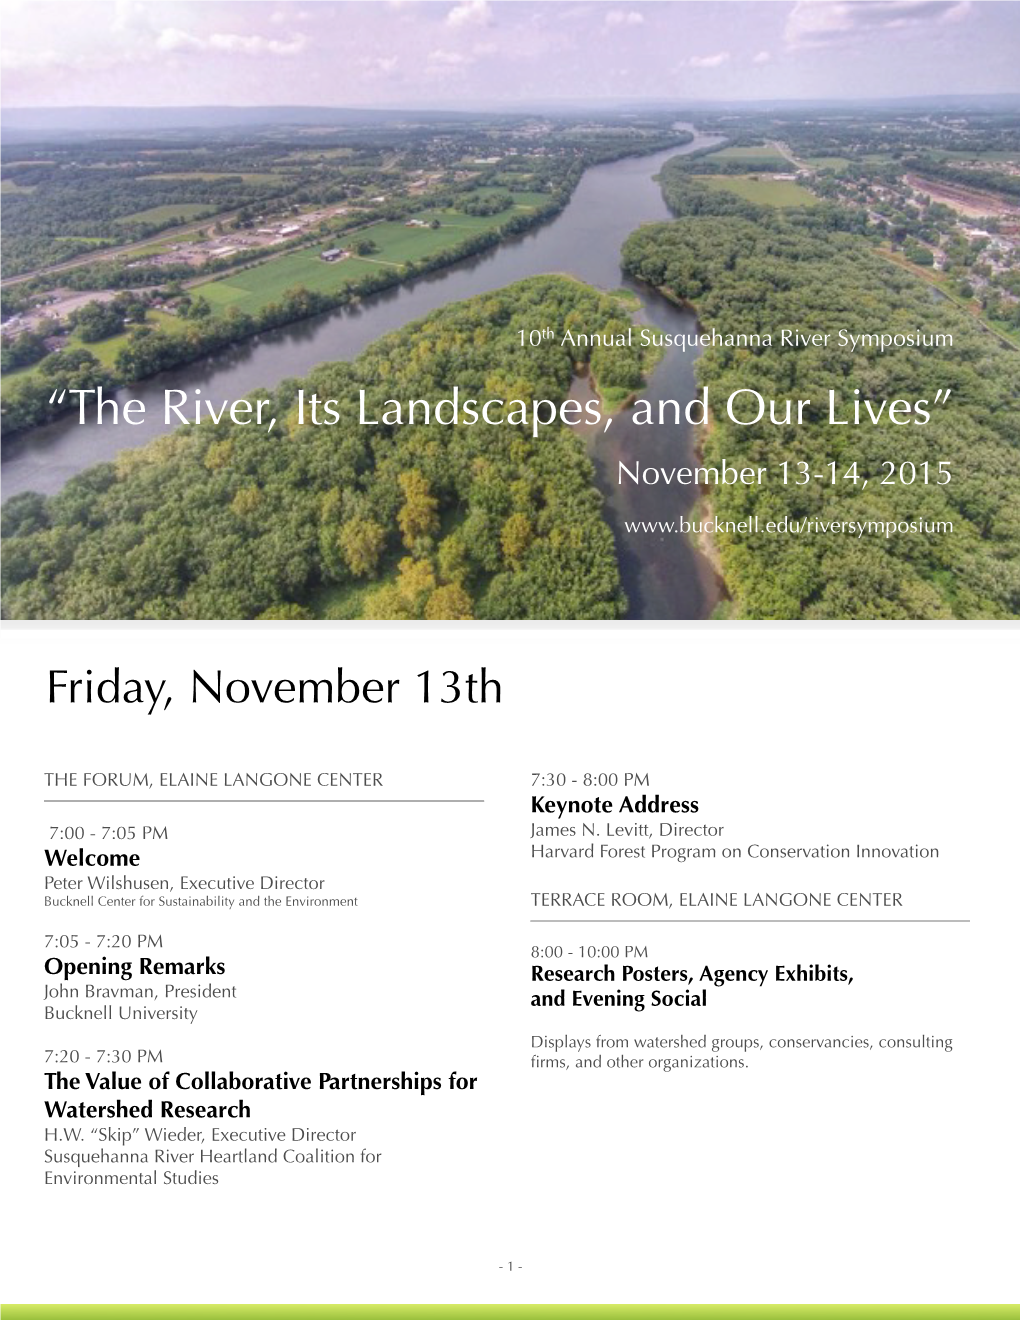 “The River, Its Landscapes, and Our Lives” November 13-14, 2015